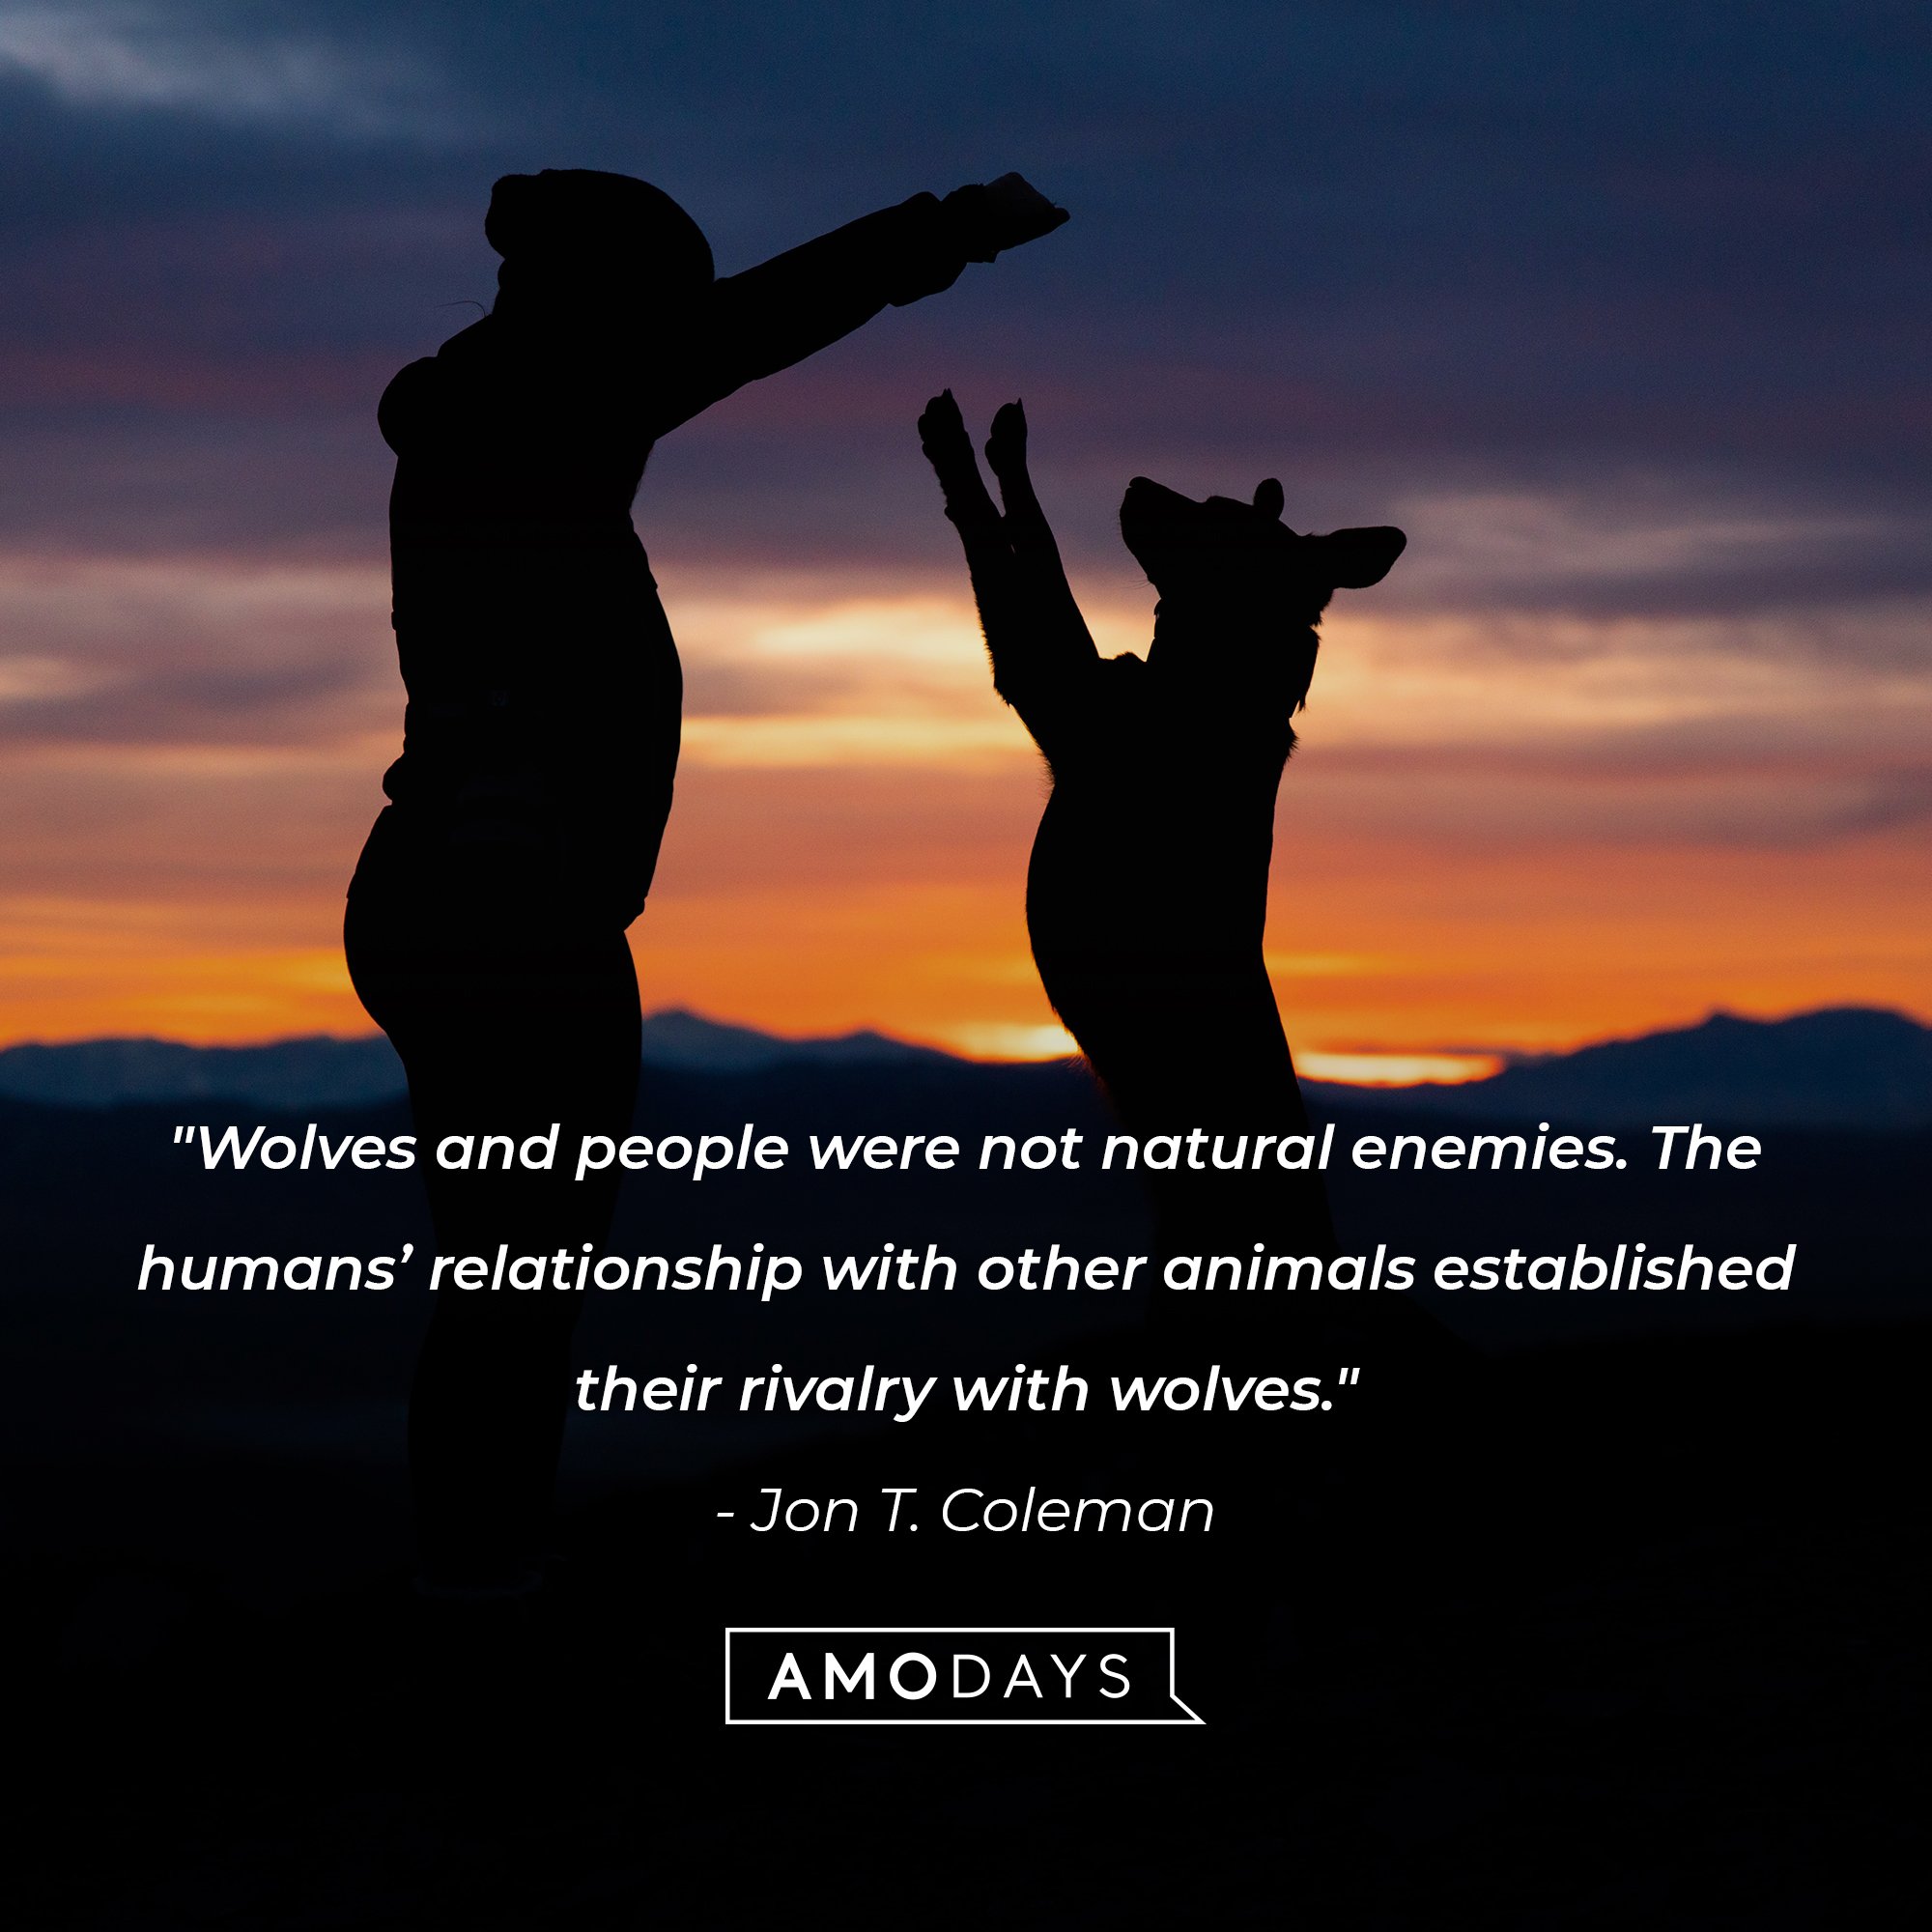  Jon T. Coleman's quote: "Wolves and people were not natural enemies. The humans’ relationship with other animals established their rivalry with wolves." | Image: AmoDays